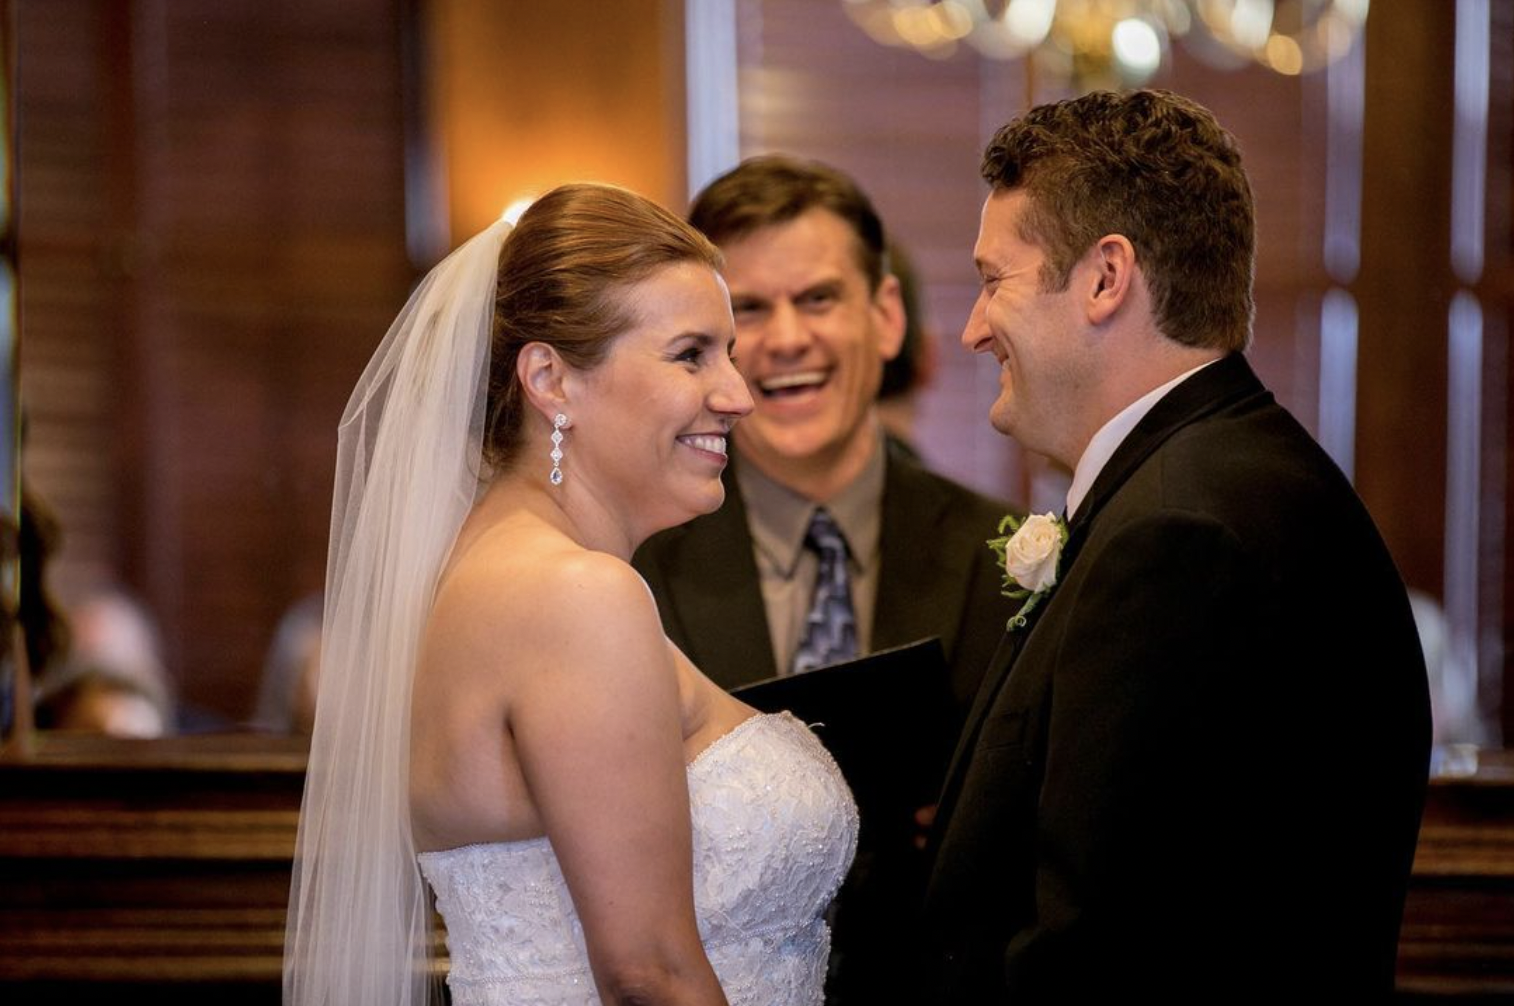 Bride, groom, and wedding officiant laugh during wedding ceremony